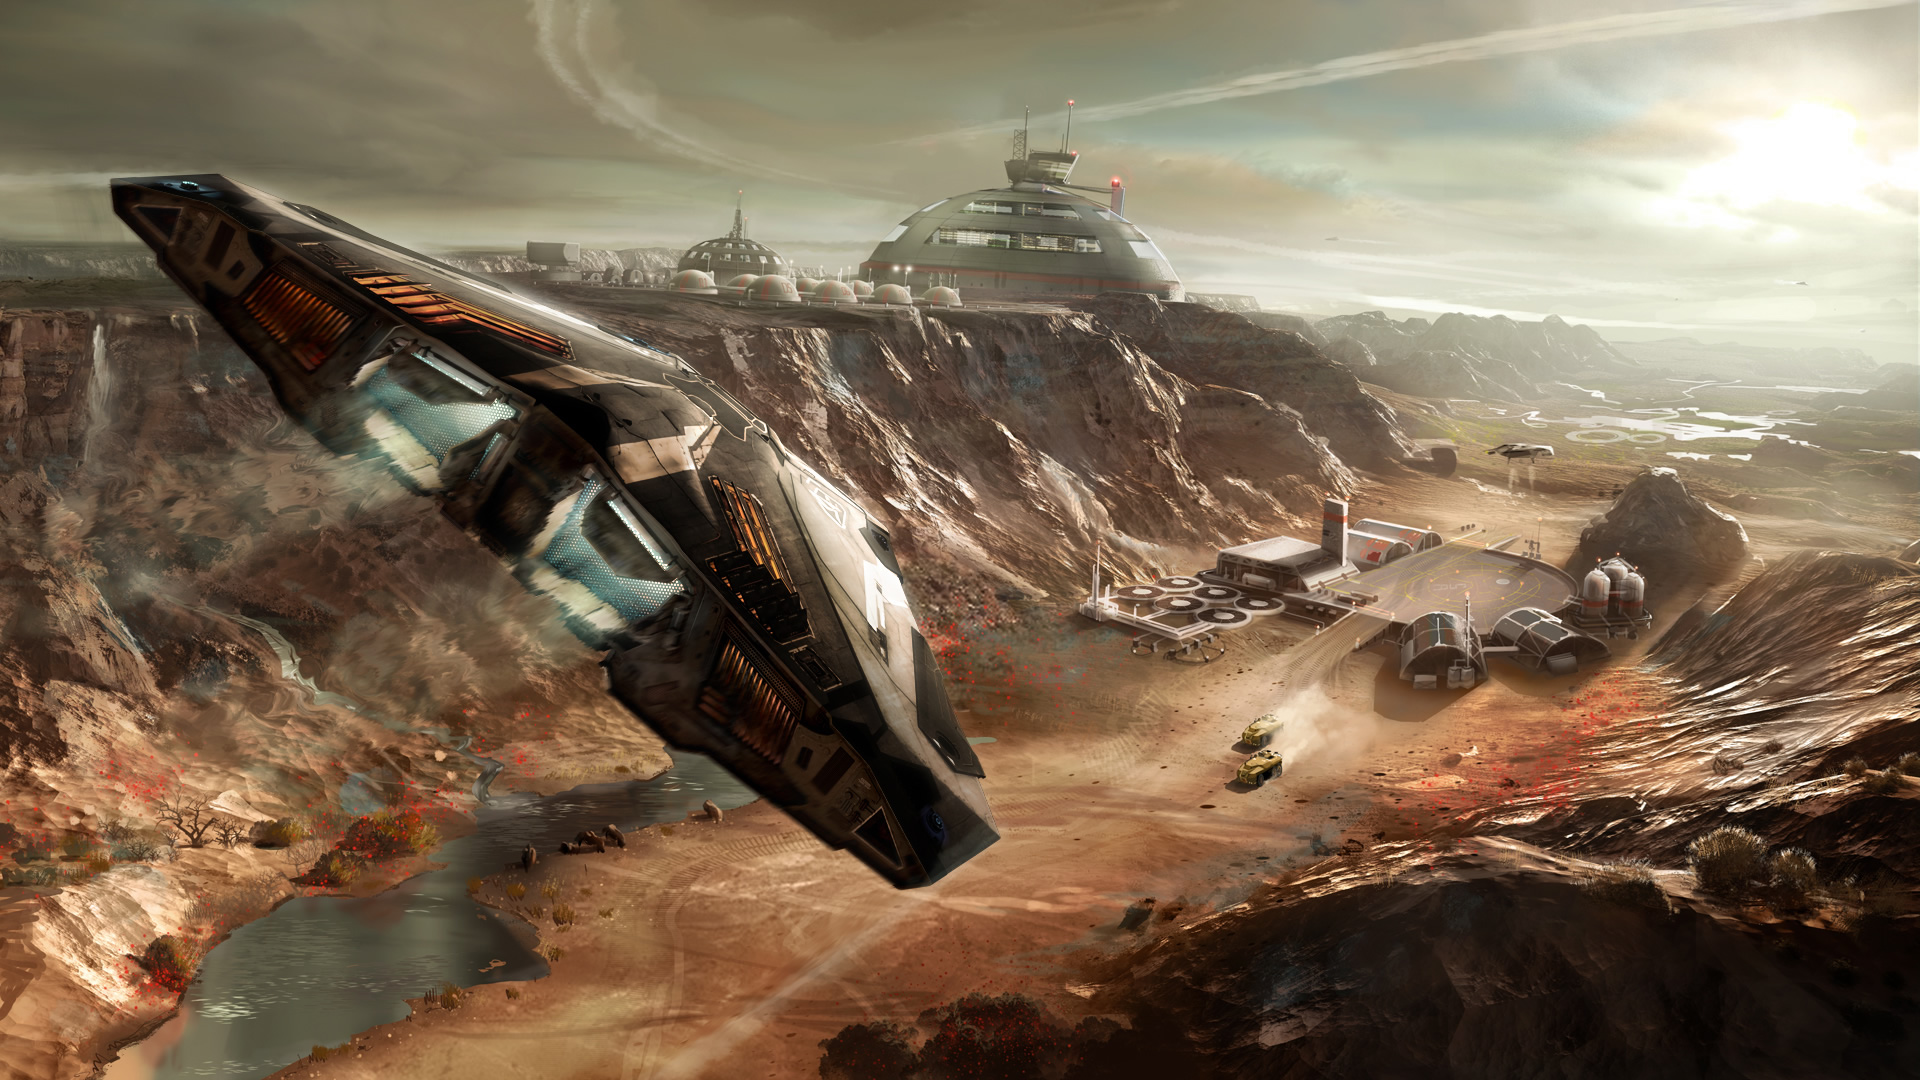 HD desktop wallpaper from Elite: Dangerous video game depicting a spaceship flying over a rugged extraterrestrial landscape with bases in the background.